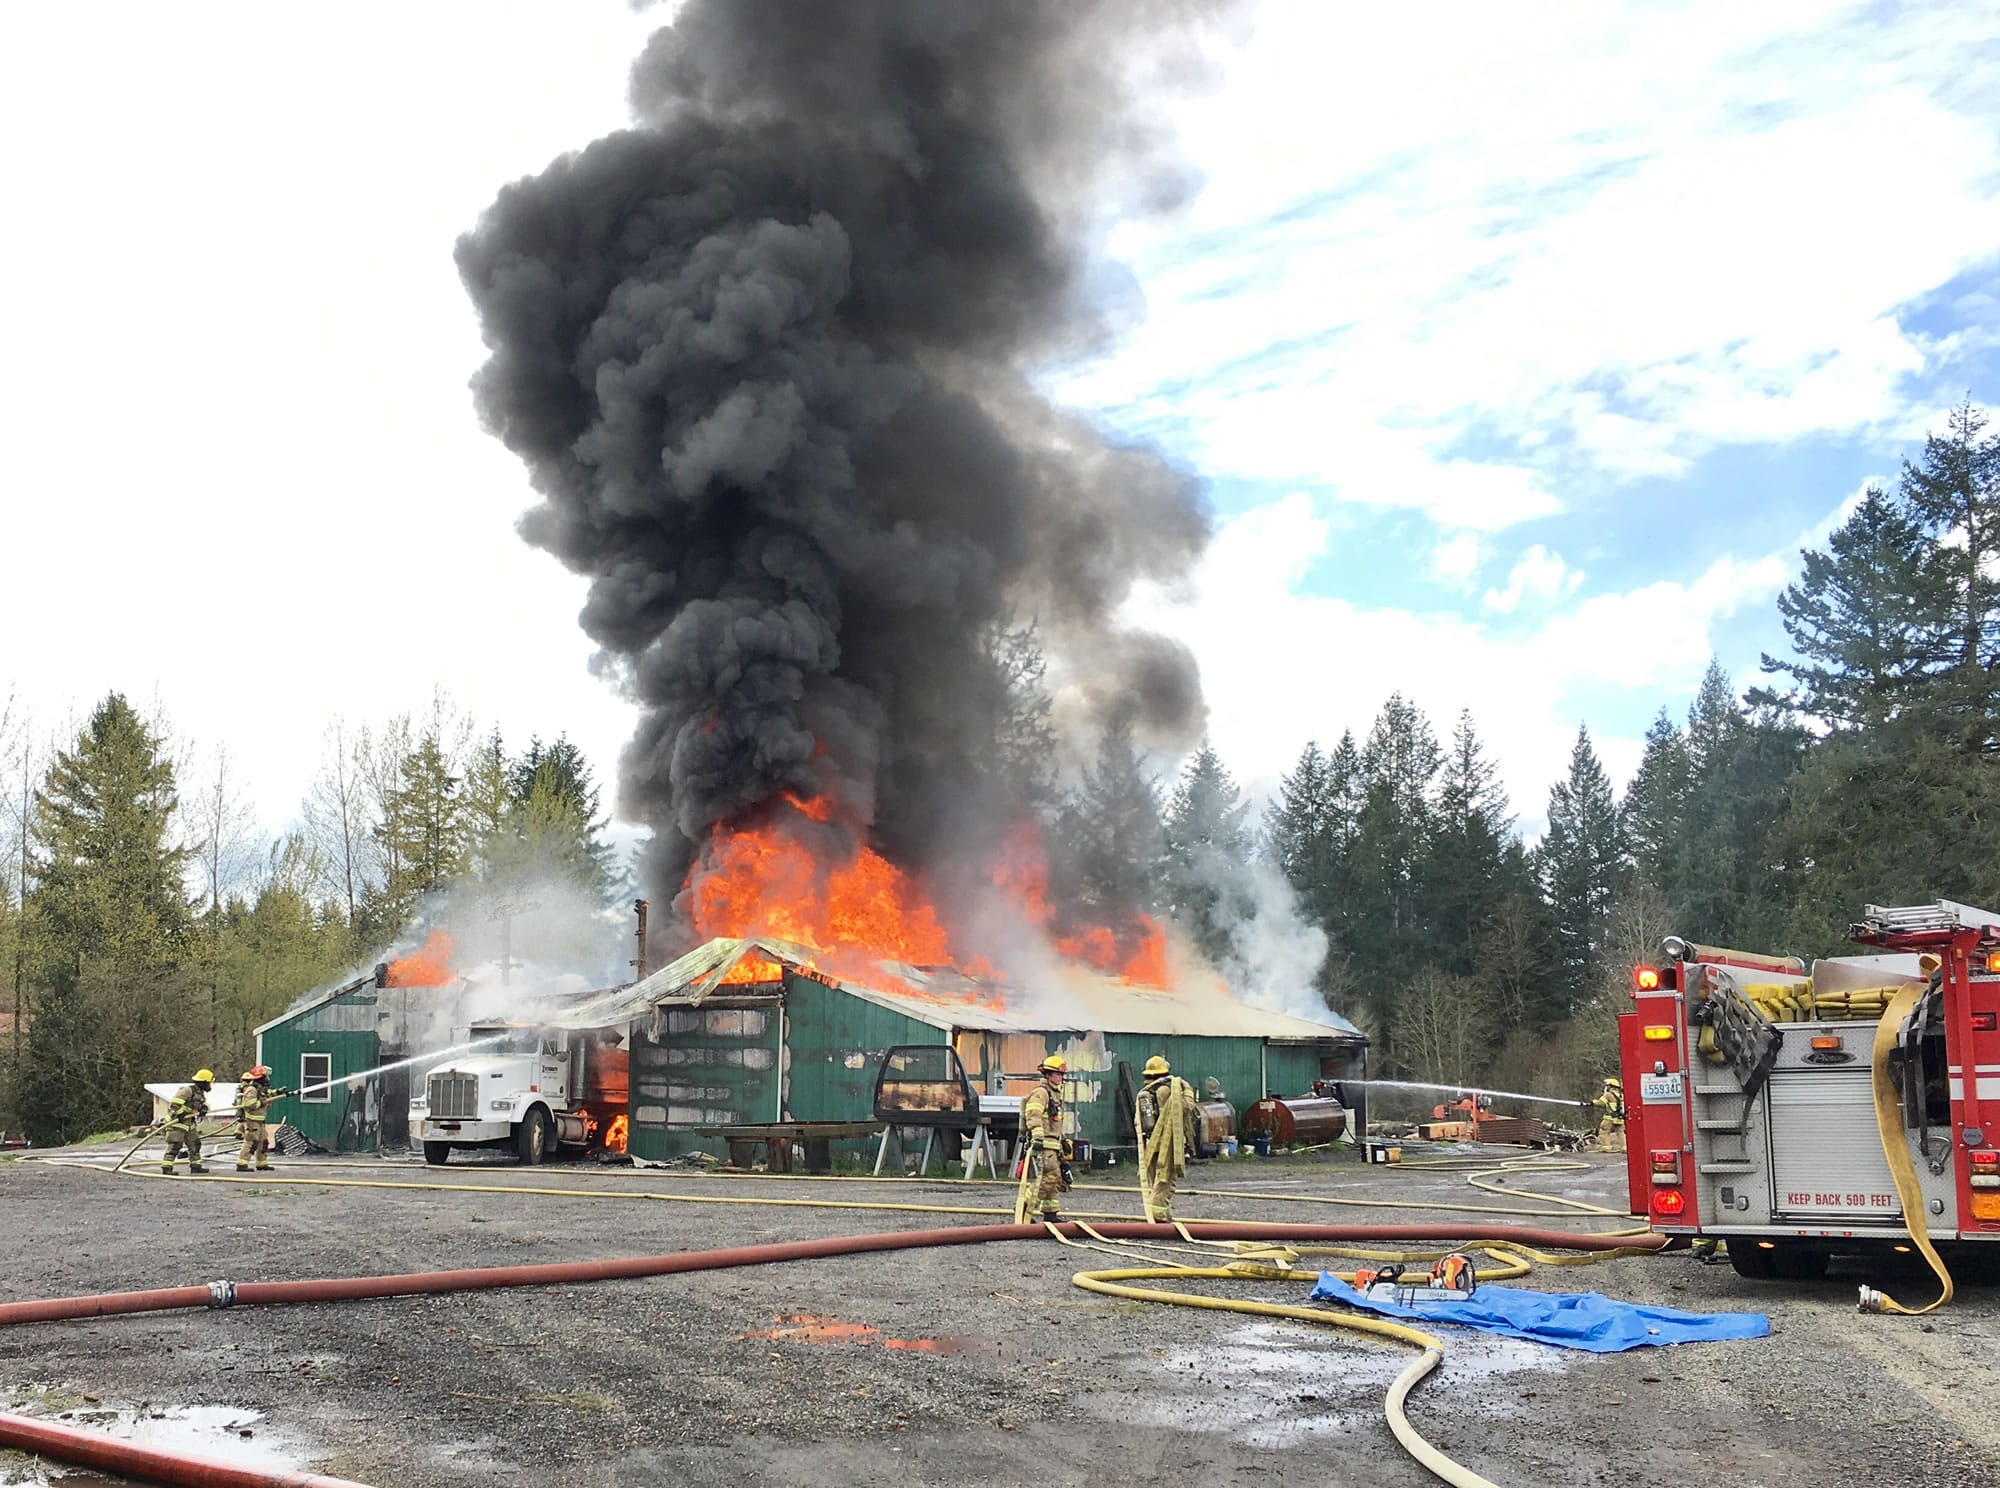 A two-alarm fire destroyed a pole barn Wednesday afternoon northwest of Battle Ground.